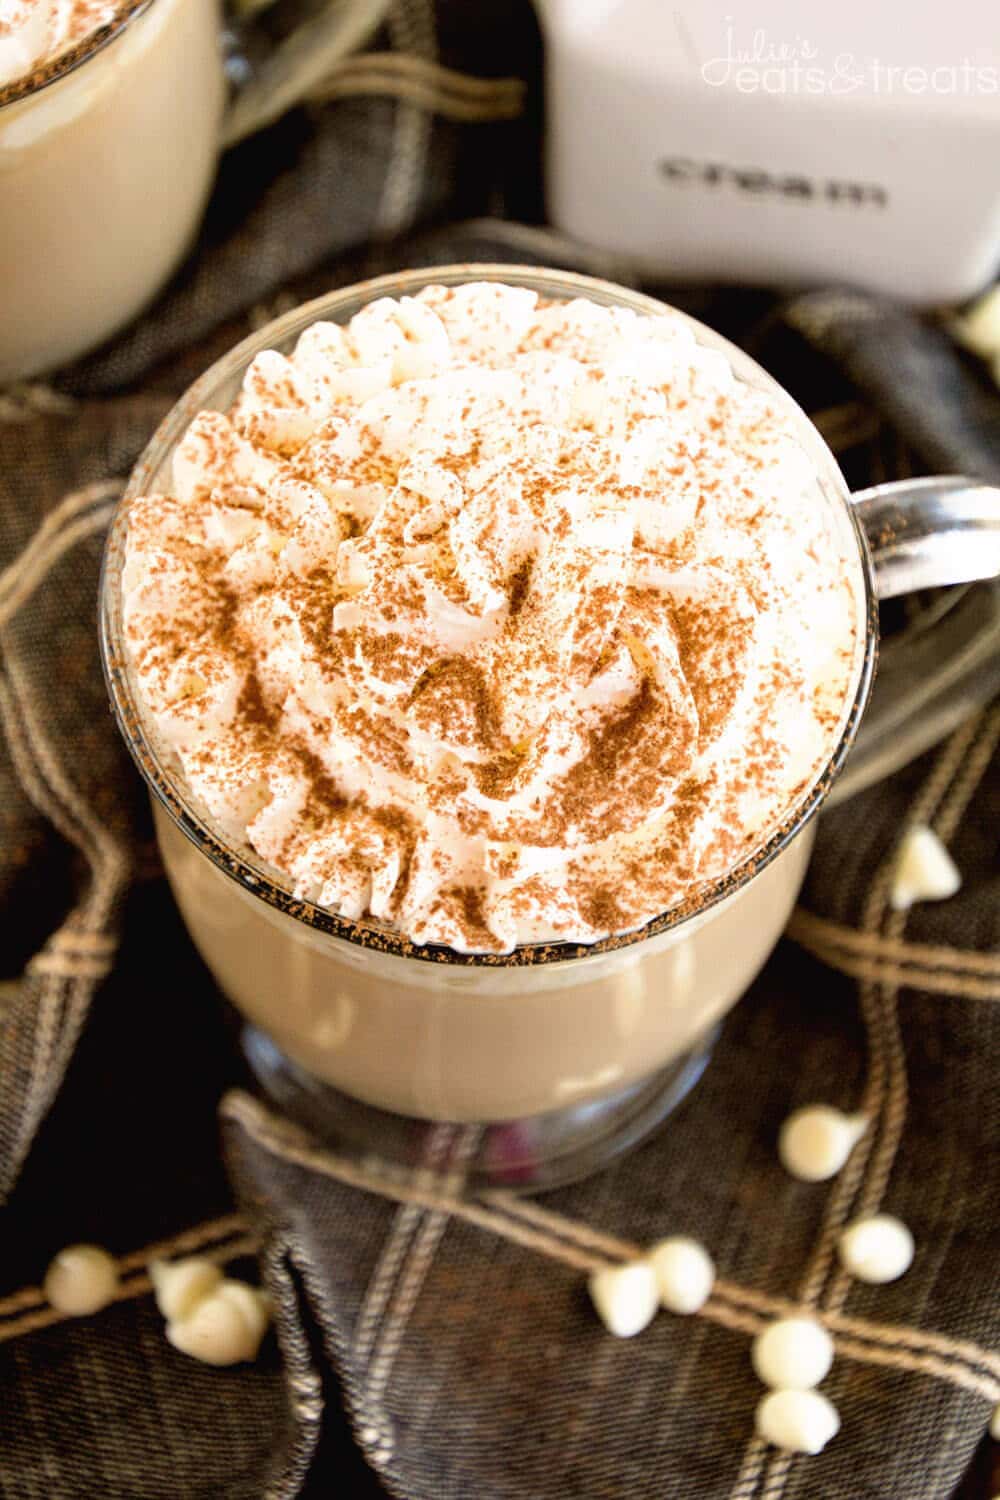 White Chocolate Latte Recipe ~ Delicious, Easy, Homemade White Chocolate Latte Recipe that Will Have You Sipping Lattes Whenever You Want!